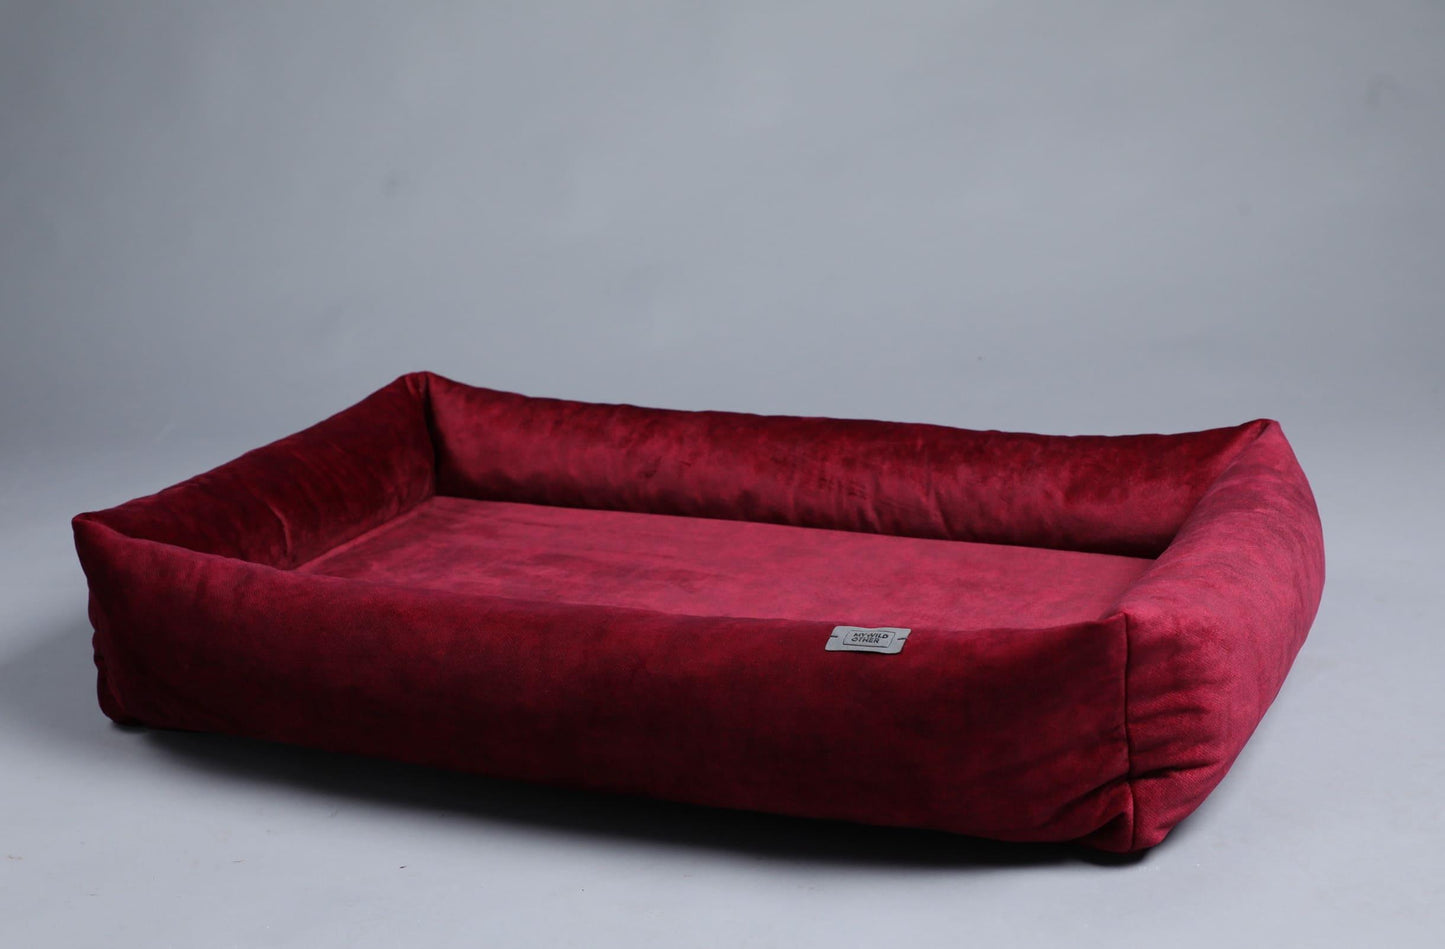 Premium dog bed with sides | 2-sided | RUBY RED - premium dog goods handmade in Europe by My Wild Other